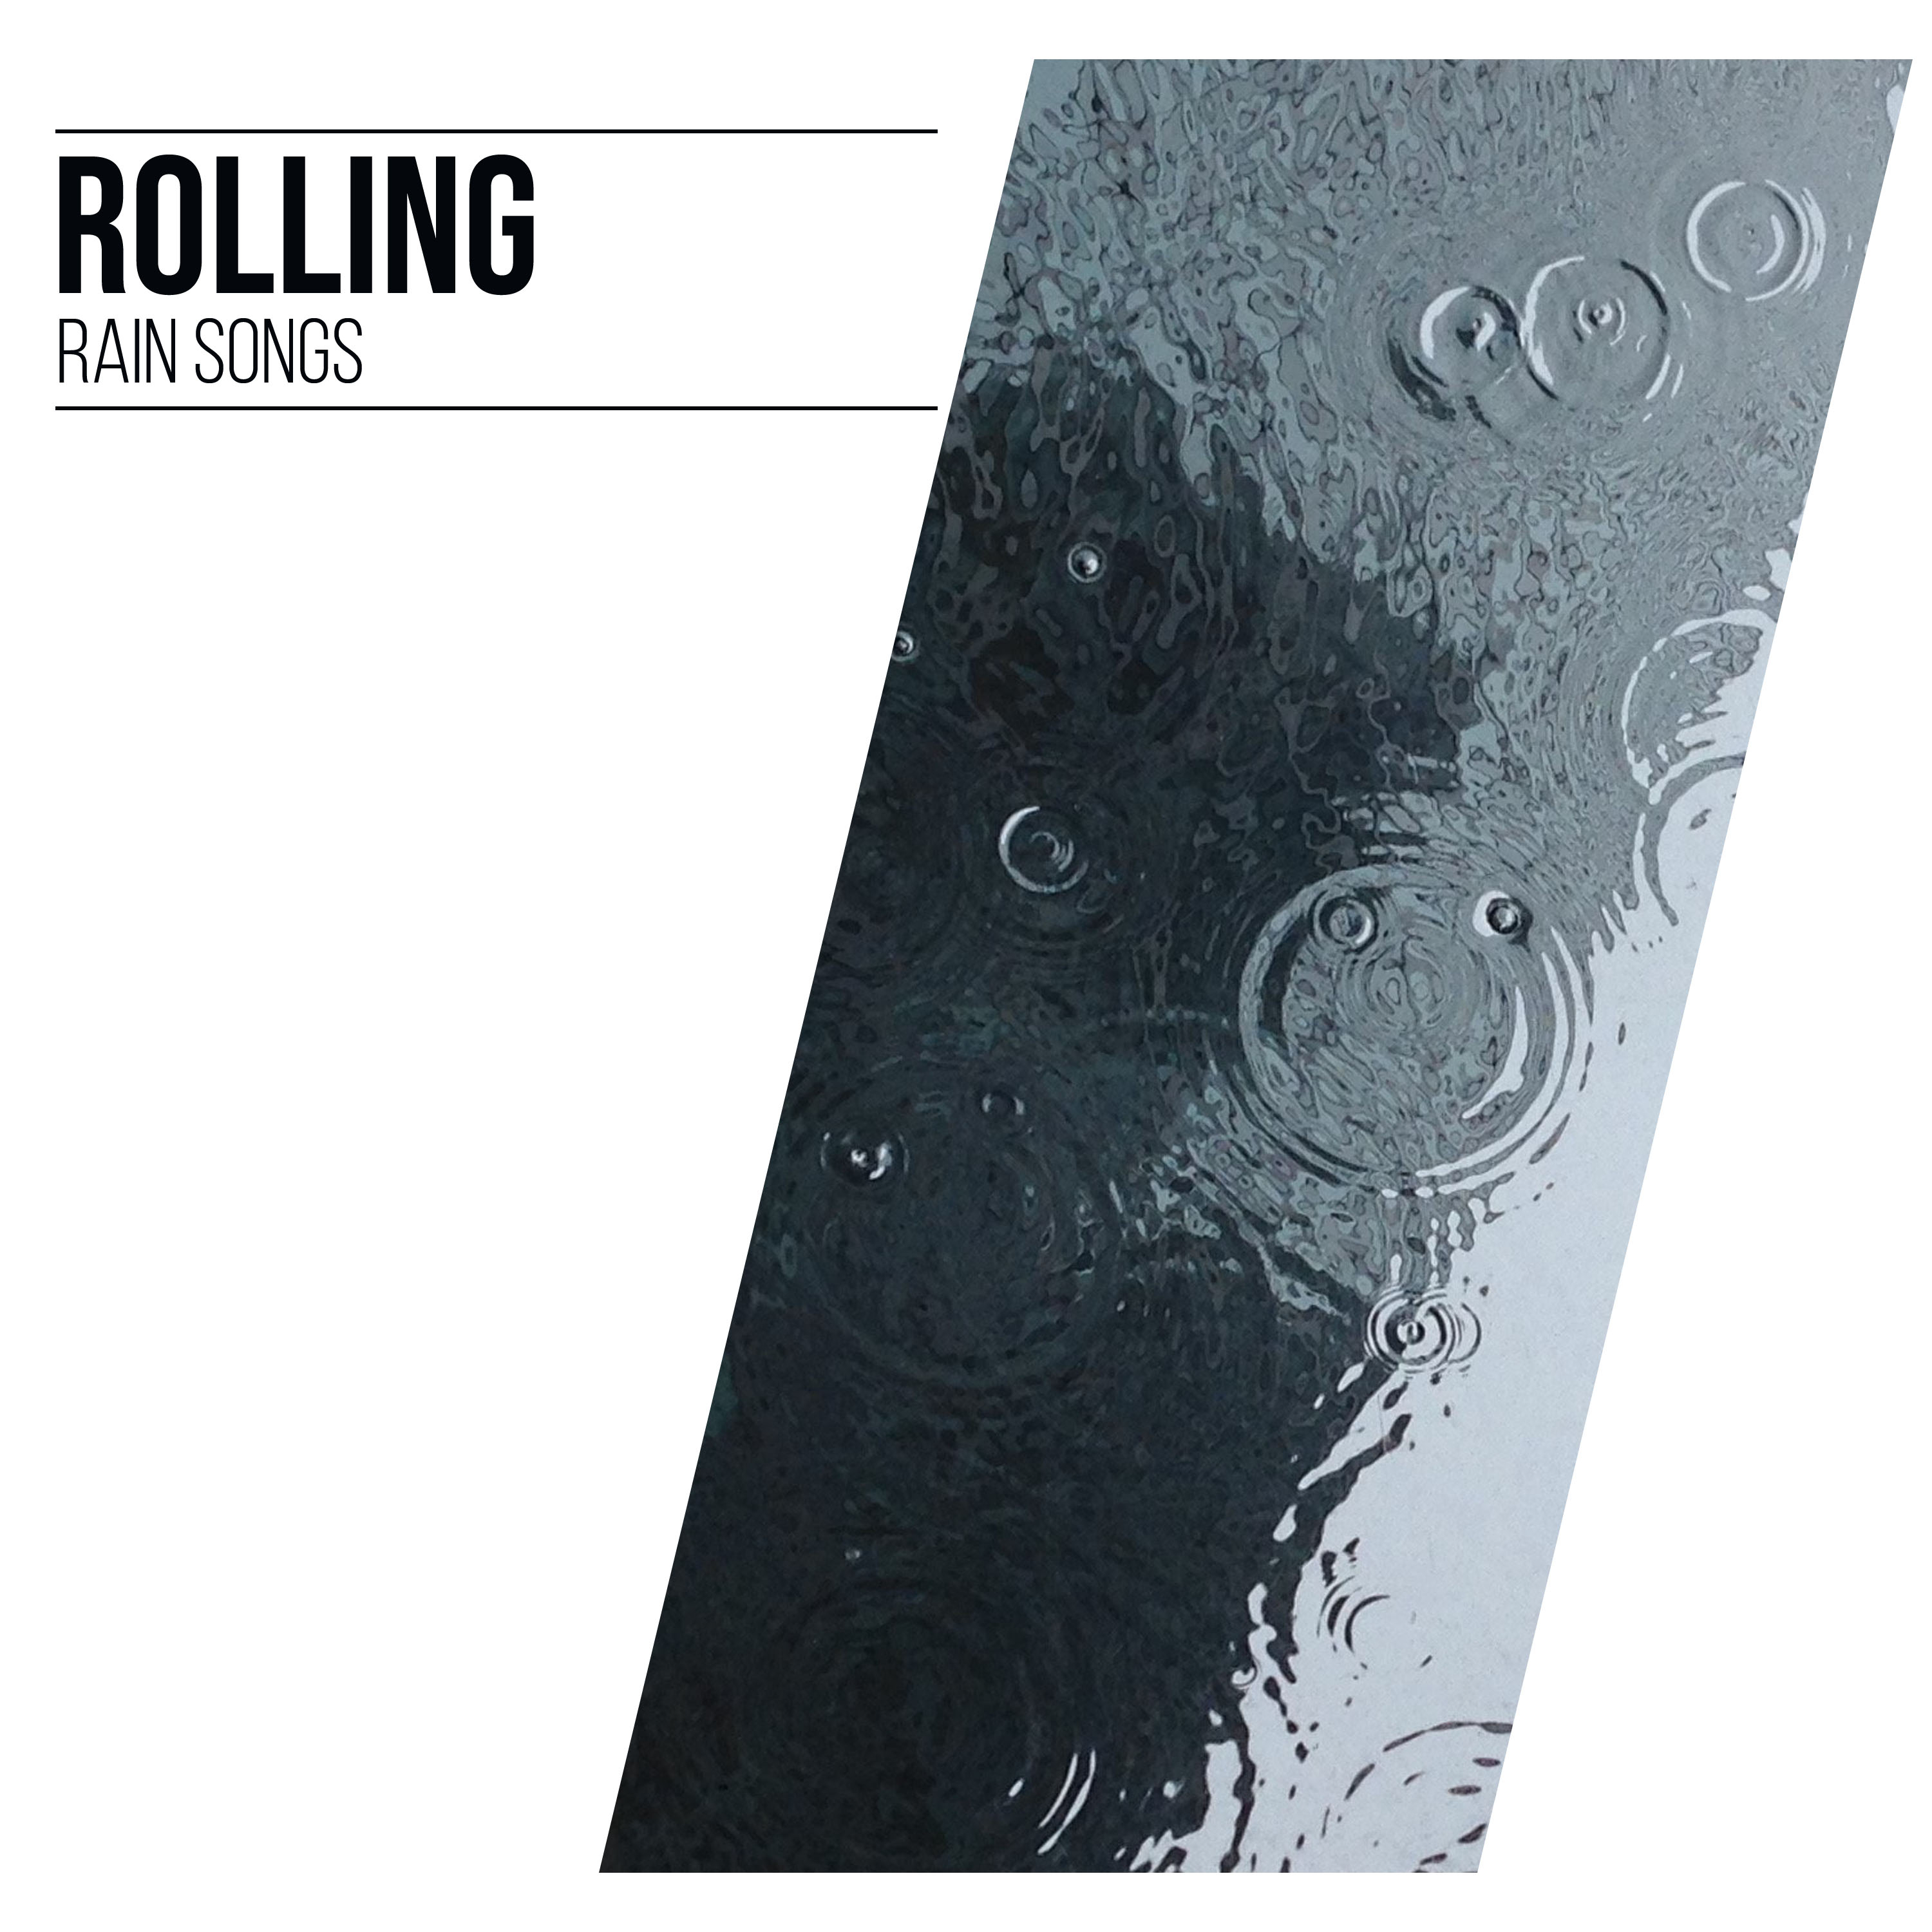 12 Rolling Rain Songs for Yoga and Meditation